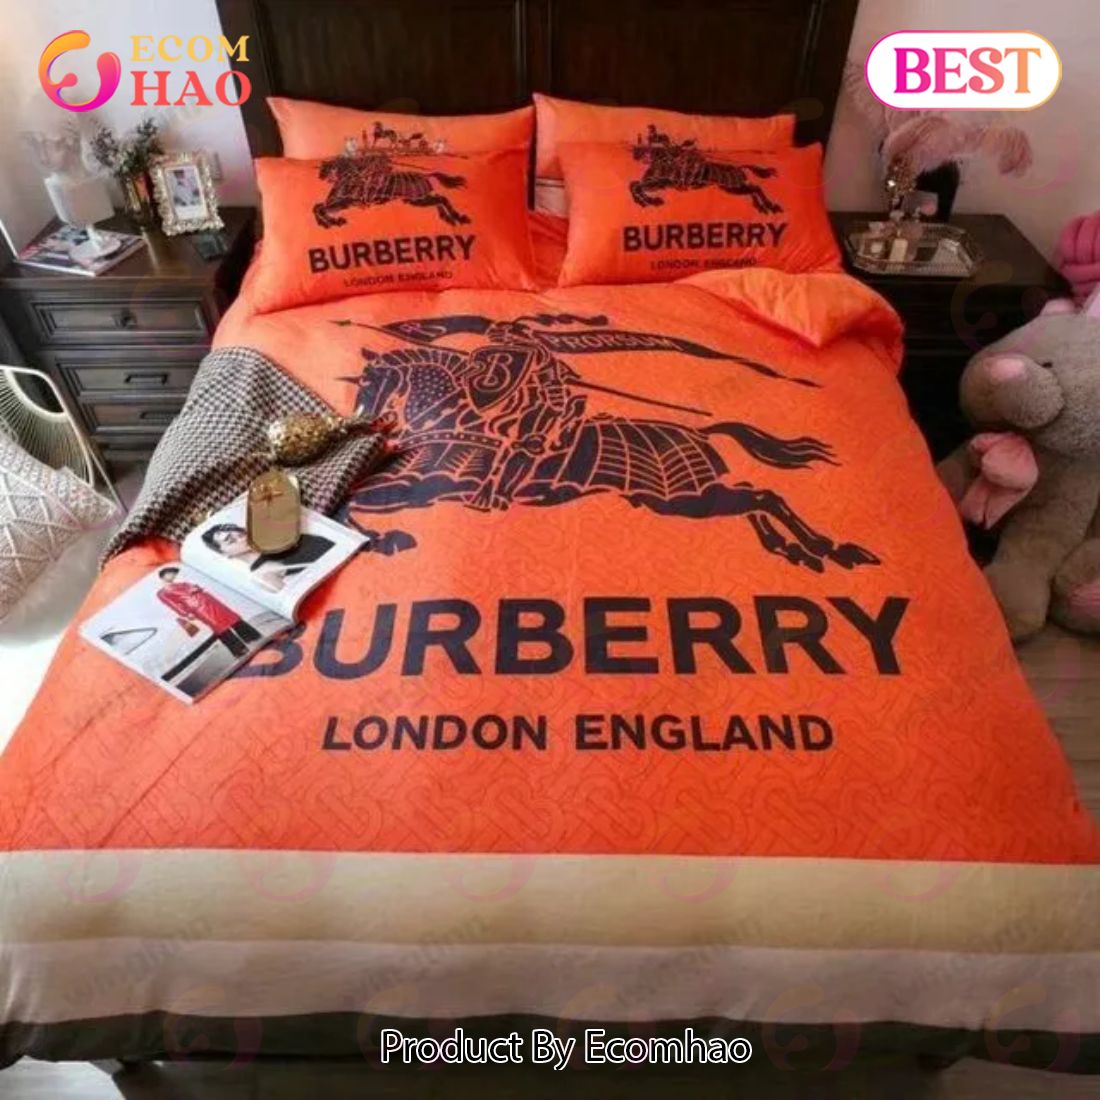 Burberry Orange New Bedding Sets Printed Bedding Sets Quilt Sets Duvet Cover Luxury Brand Bedding Decor Bedroom Sets Best Luxury Bed Sets Gift Thankgivings And Christmas